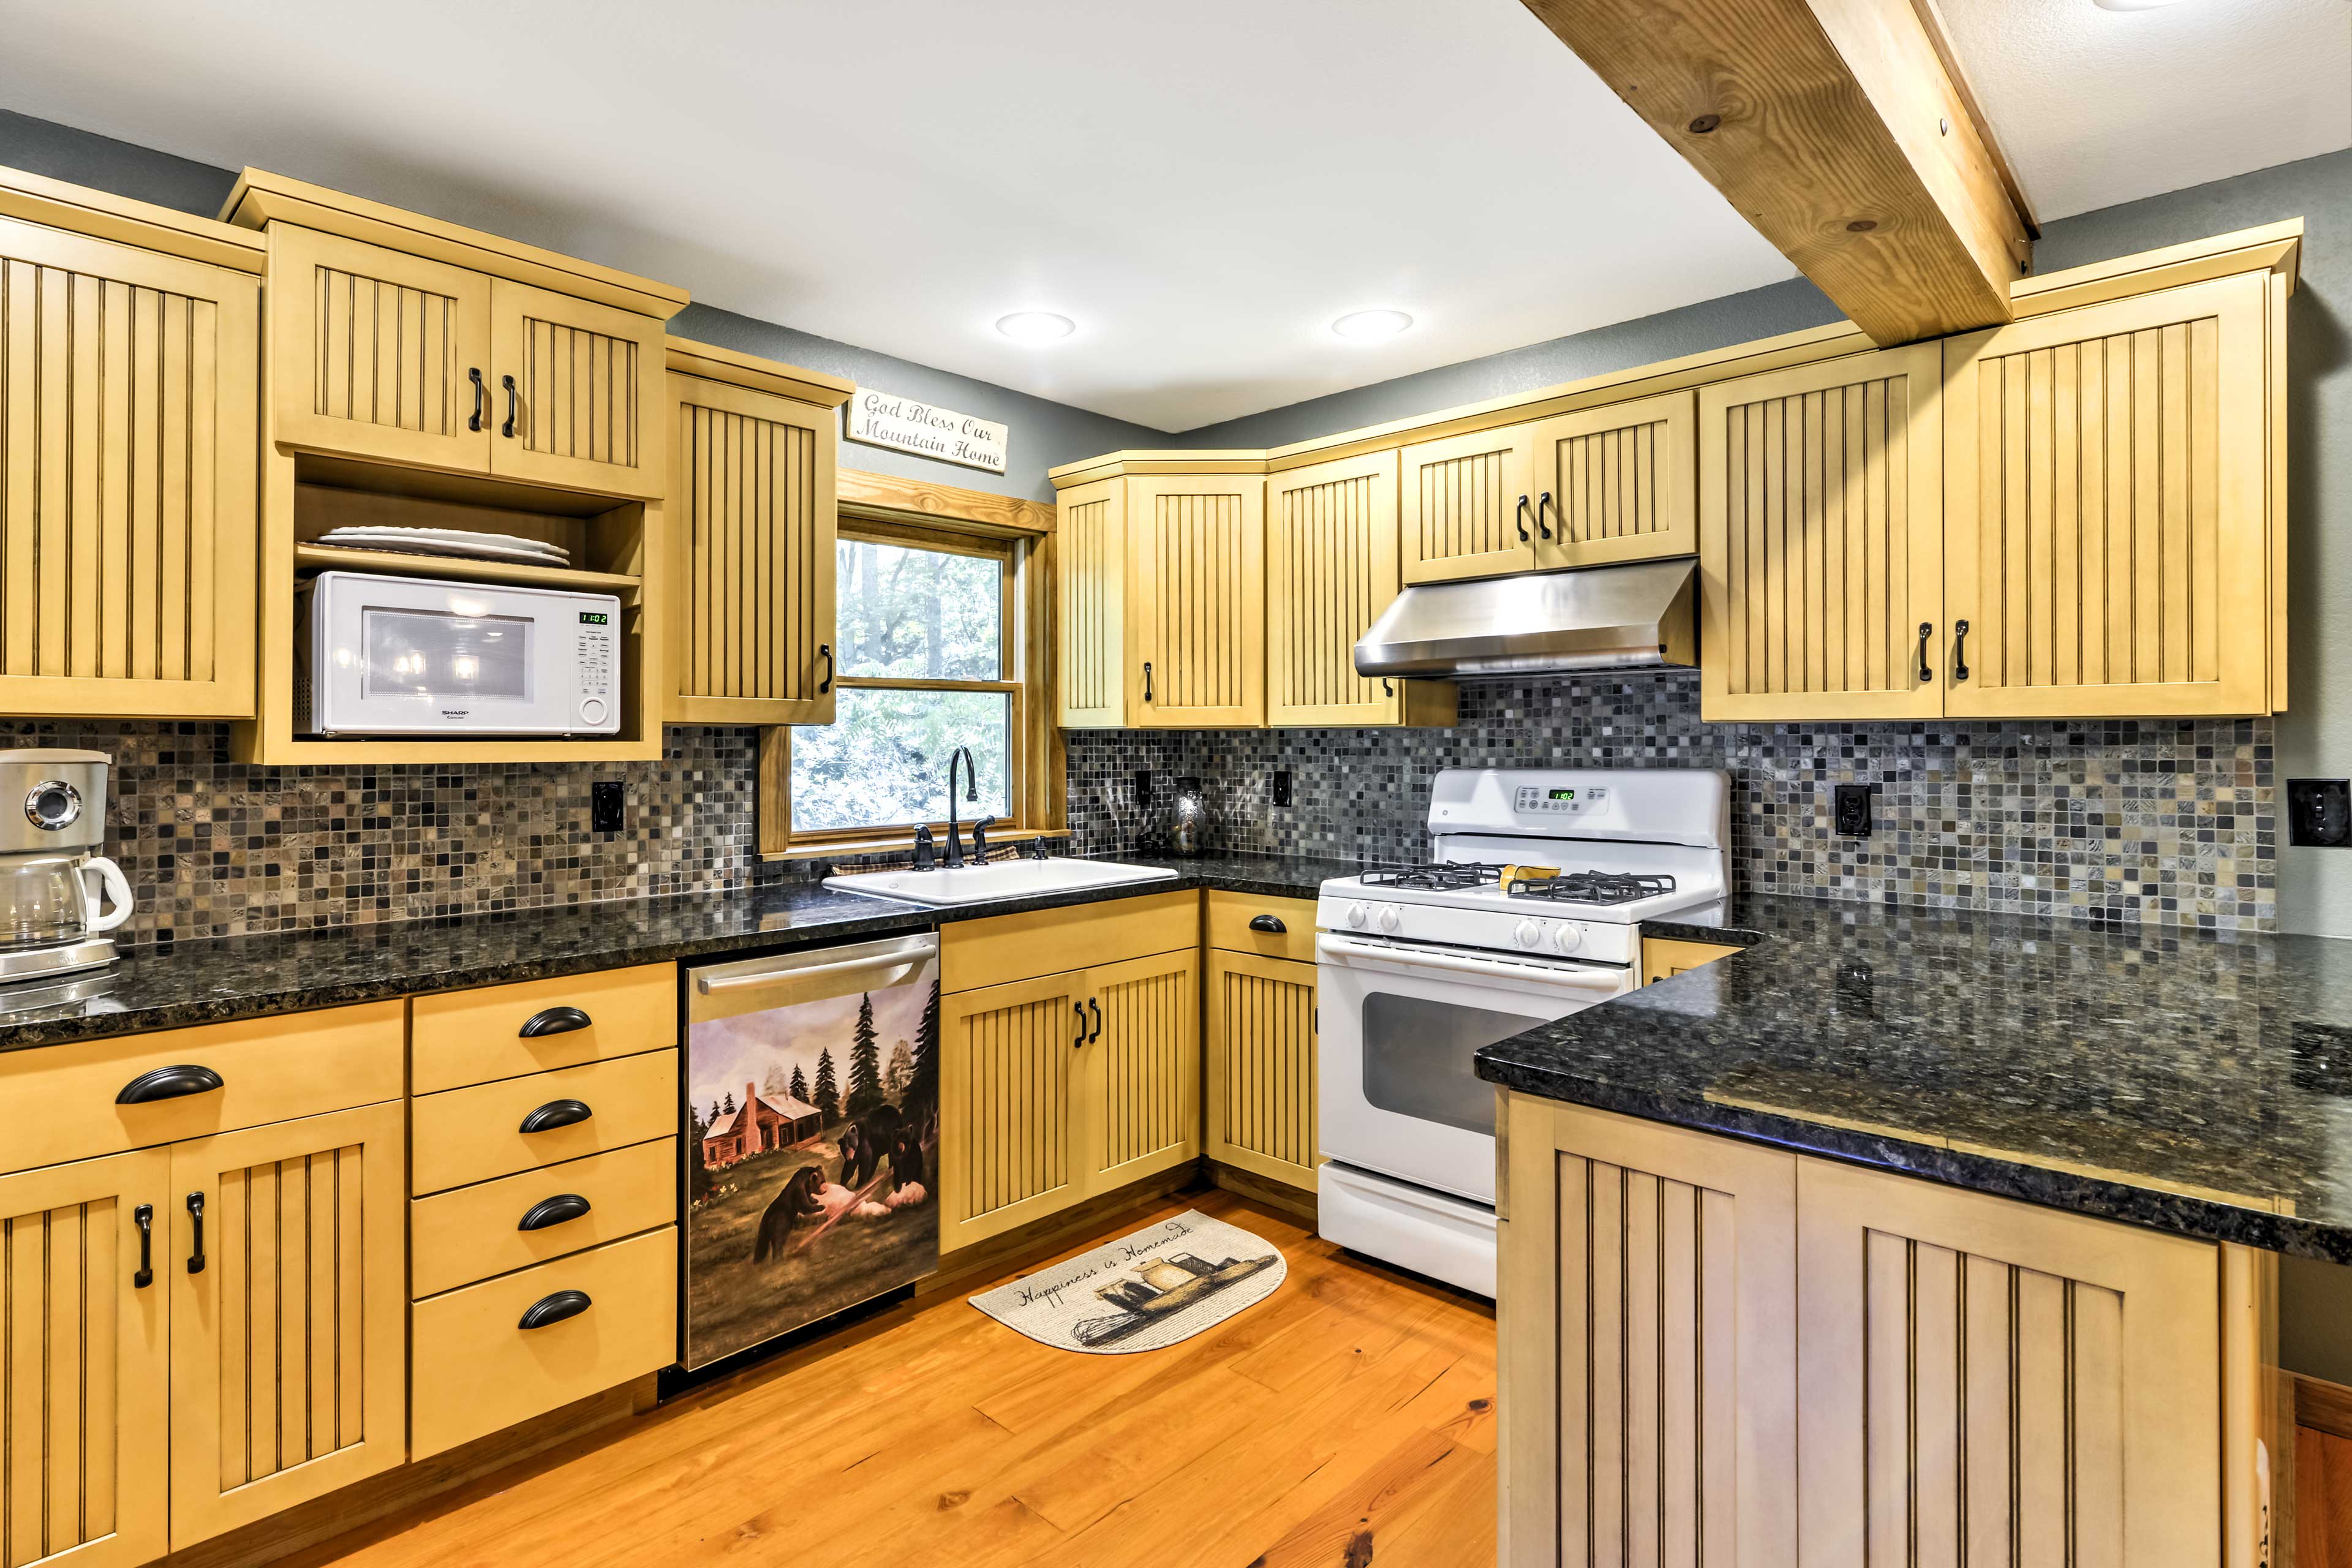 Kitchen | Granite Counters | Crockpot | Spices | Toaster